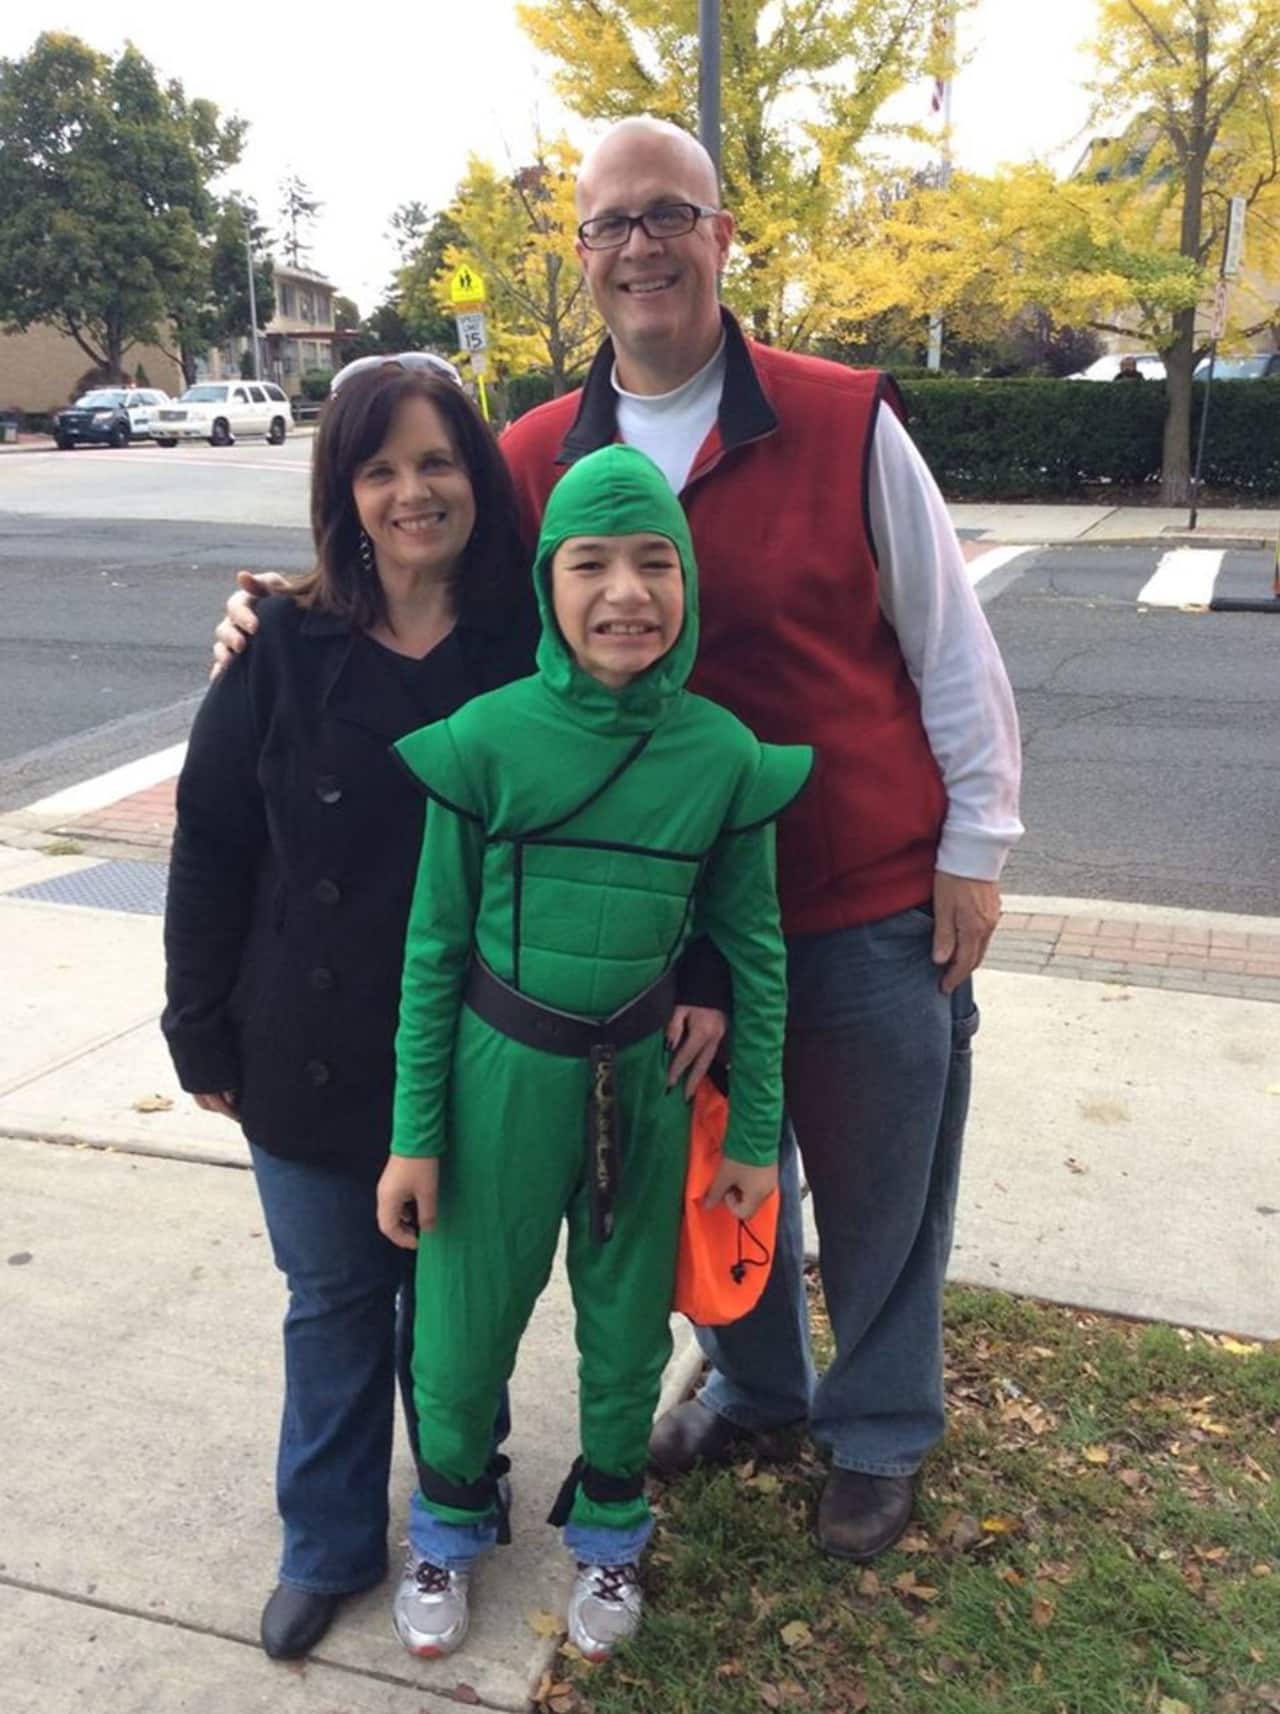 The Scarr family enjoyed the Suffern halloween parade last year. This year's parade will take place Sunday.